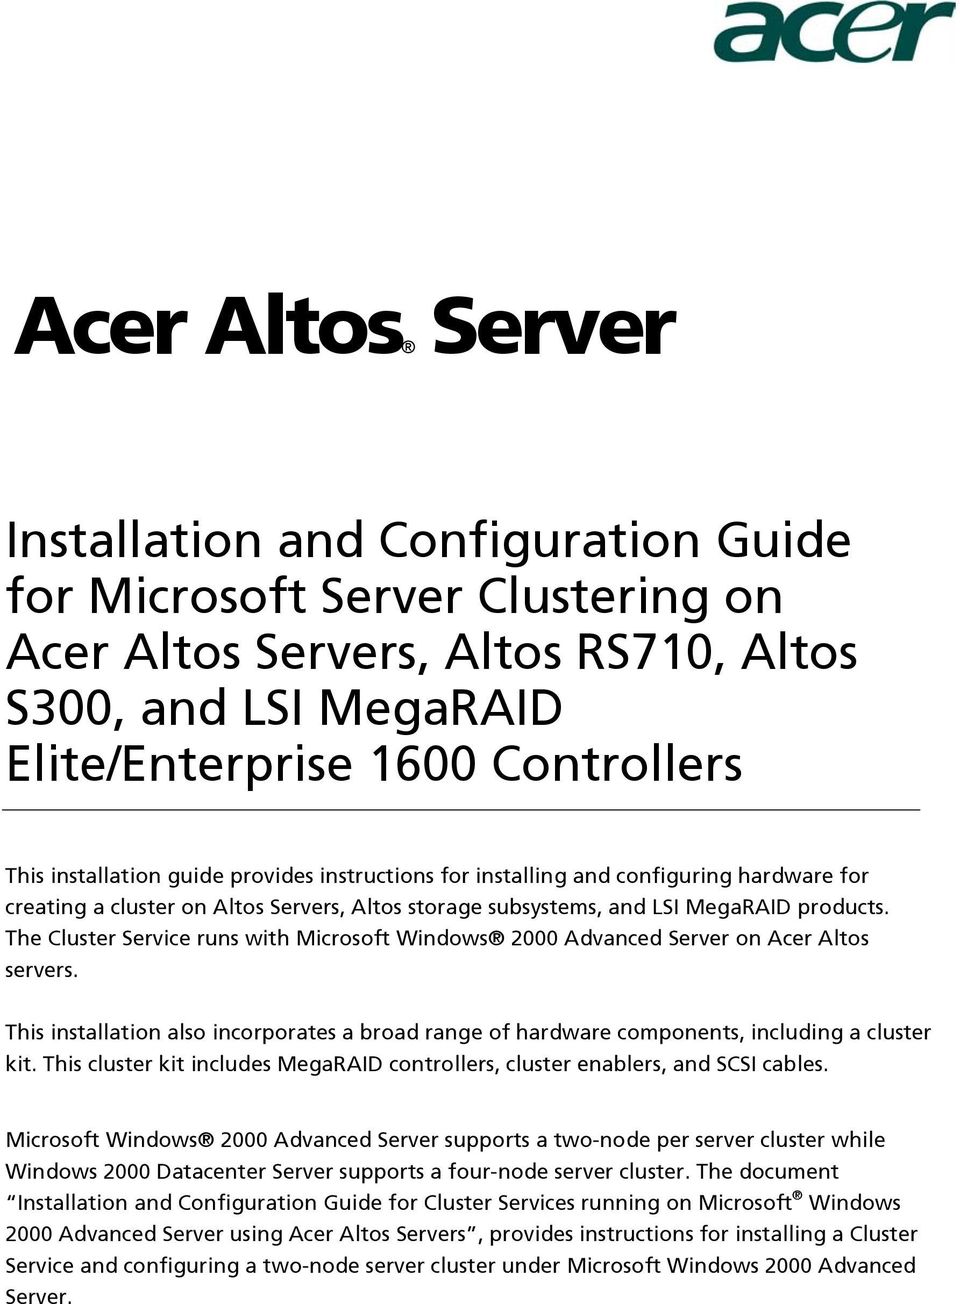 The Cluster Service runs with Microsoft Windows 2000 Advanced Server on Acer Altos servers. This installation also incorporates a broad range of hardware components, including a cluster kit.